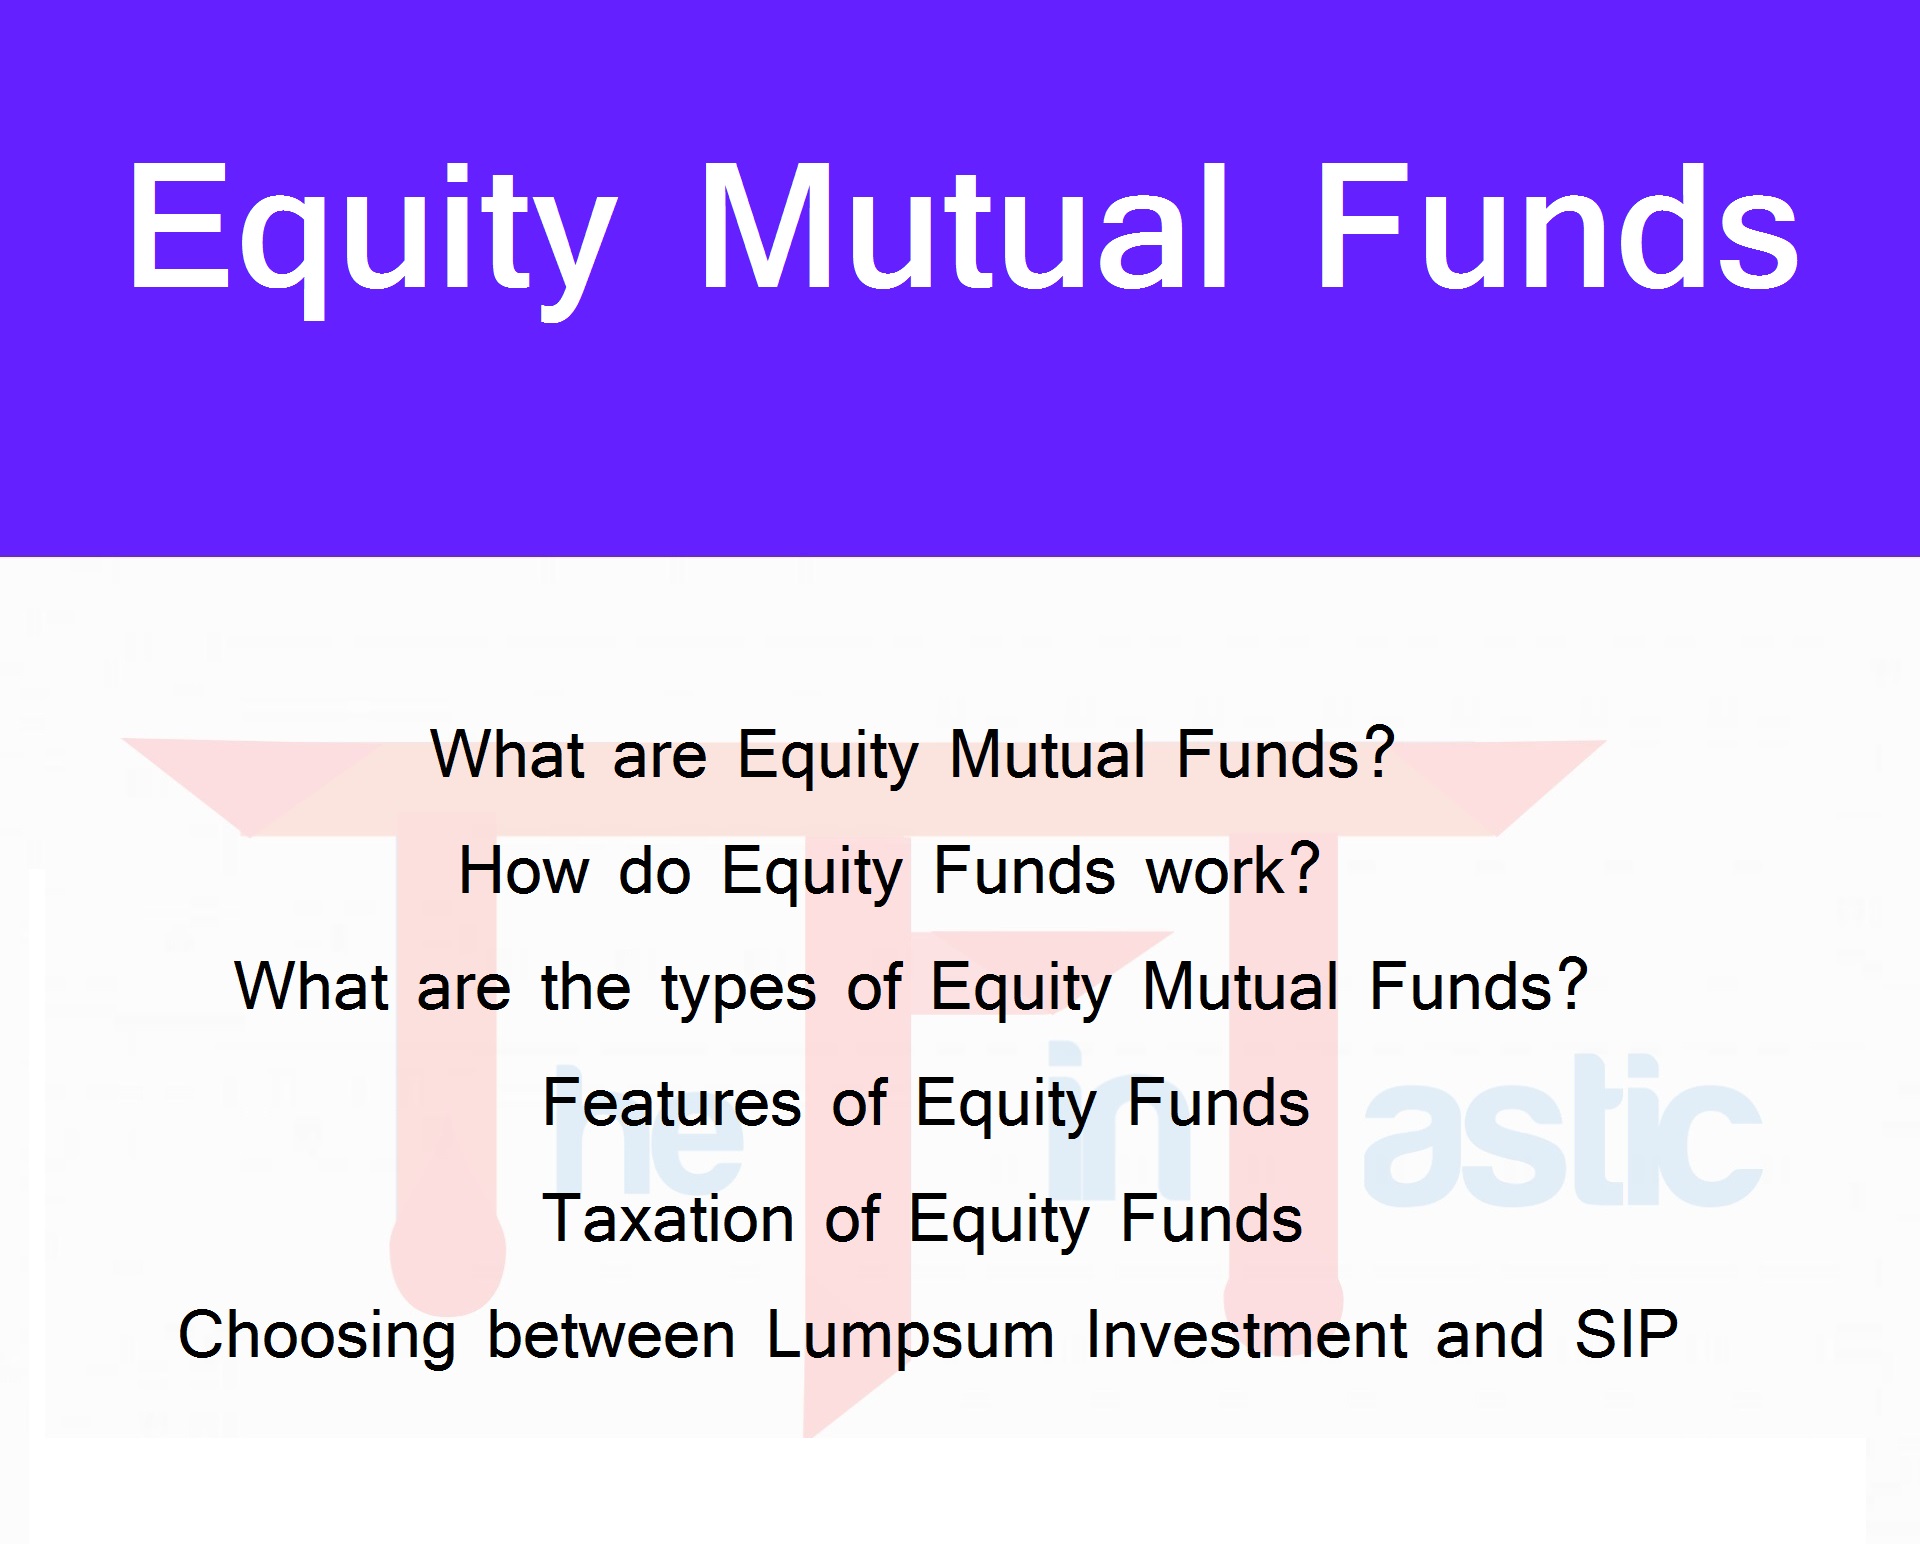 What are Equity Mutual Funds? Features, Types and Taxation of Equity Funds